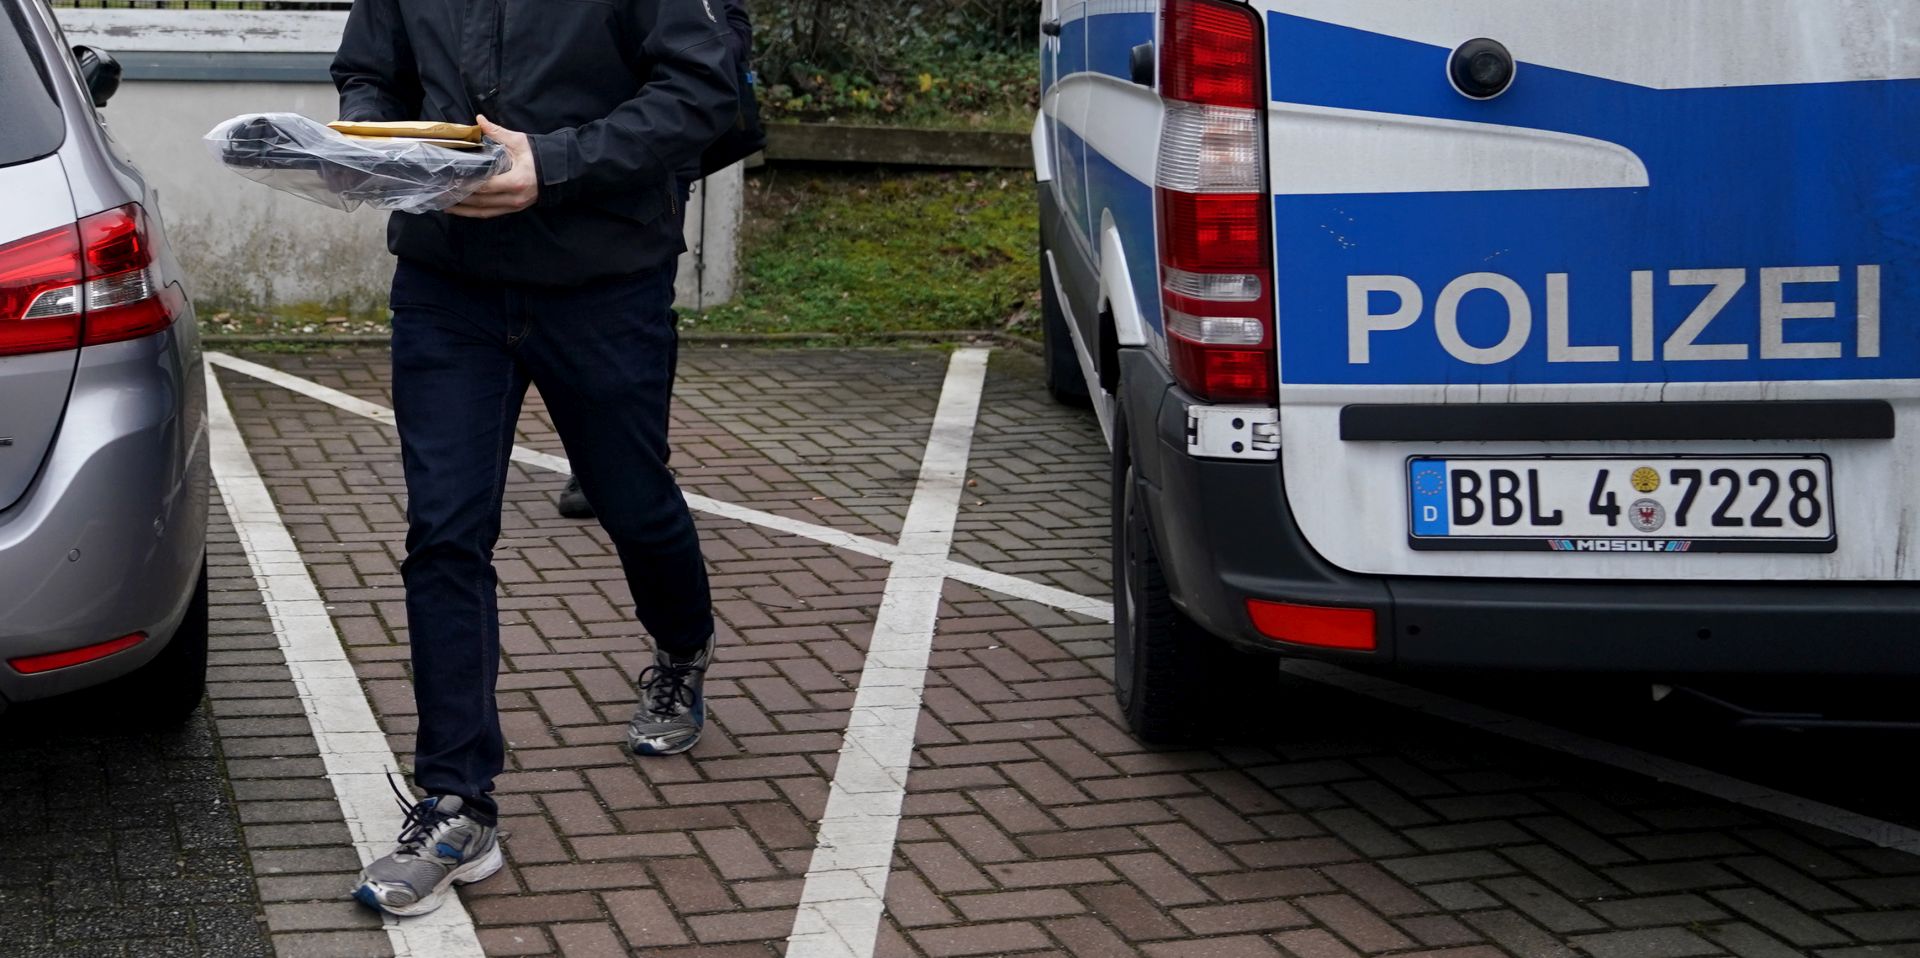 epa08153675 Police officers carry seized evidence during a raid in connection with the militant neo-Nazi group 'Combat 18' near Berlin in Wildau, in the East-German federal state Brandenburg, Germany, 23 January 2020. German Interior Minister Horst Seehofer announced on 23 January 2020 that the 'Combat 18' group has officially been banned by the government.  EPA/ALEXANDER BECHER